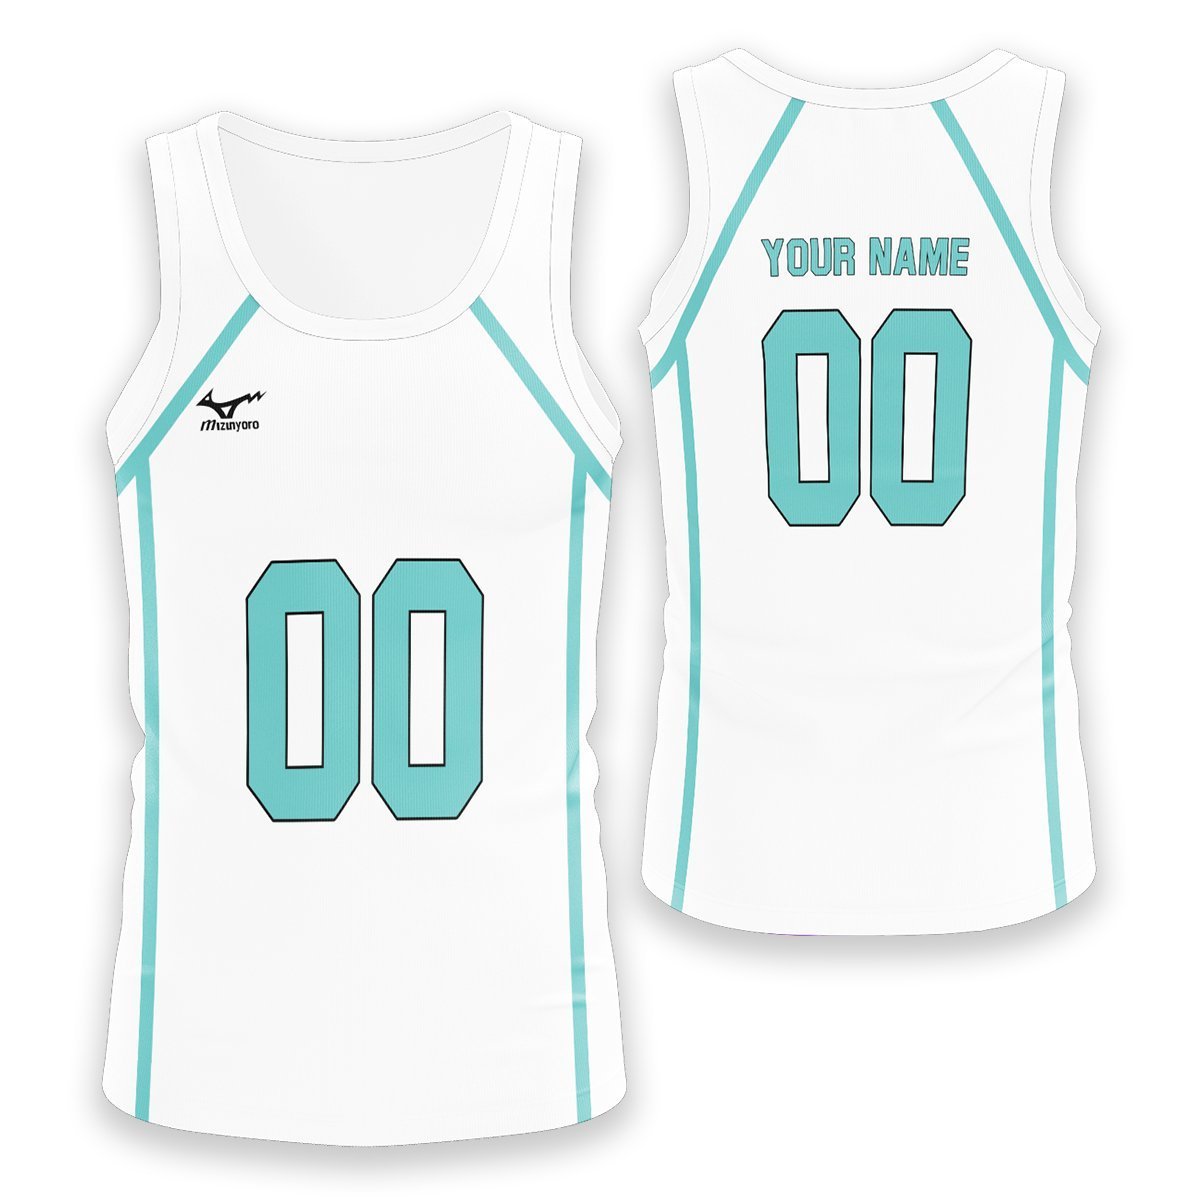 Personalized Team Aoba Johsai Unisex Tank Tops FDM3107 S Official Anime Swimsuit Merch